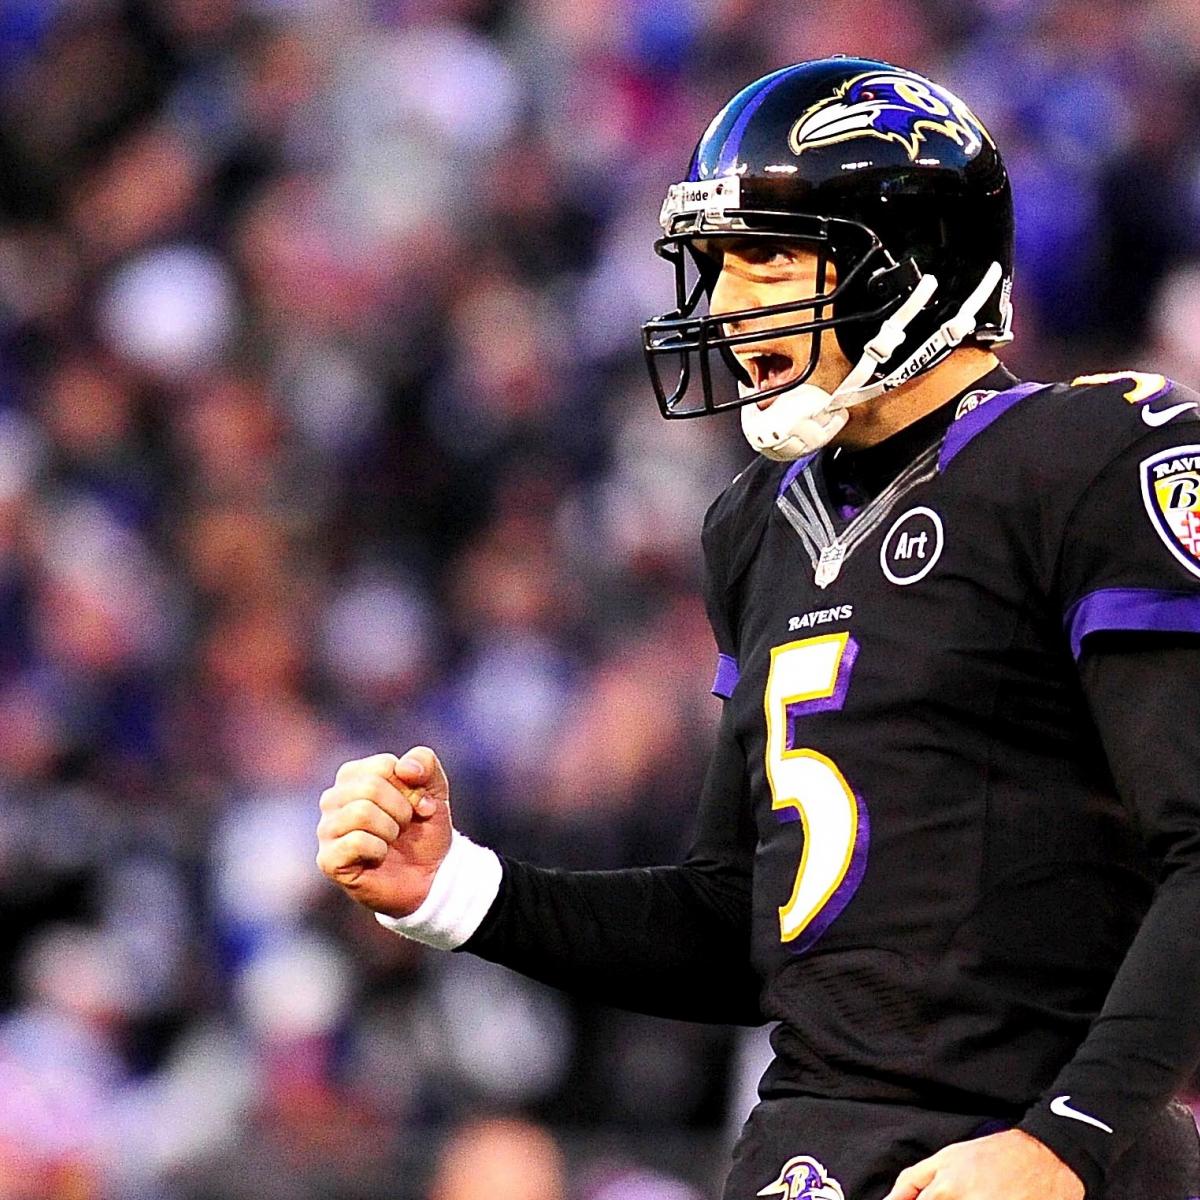 Joe Flacco Could Reportedly HighestPaid Player in NFL History